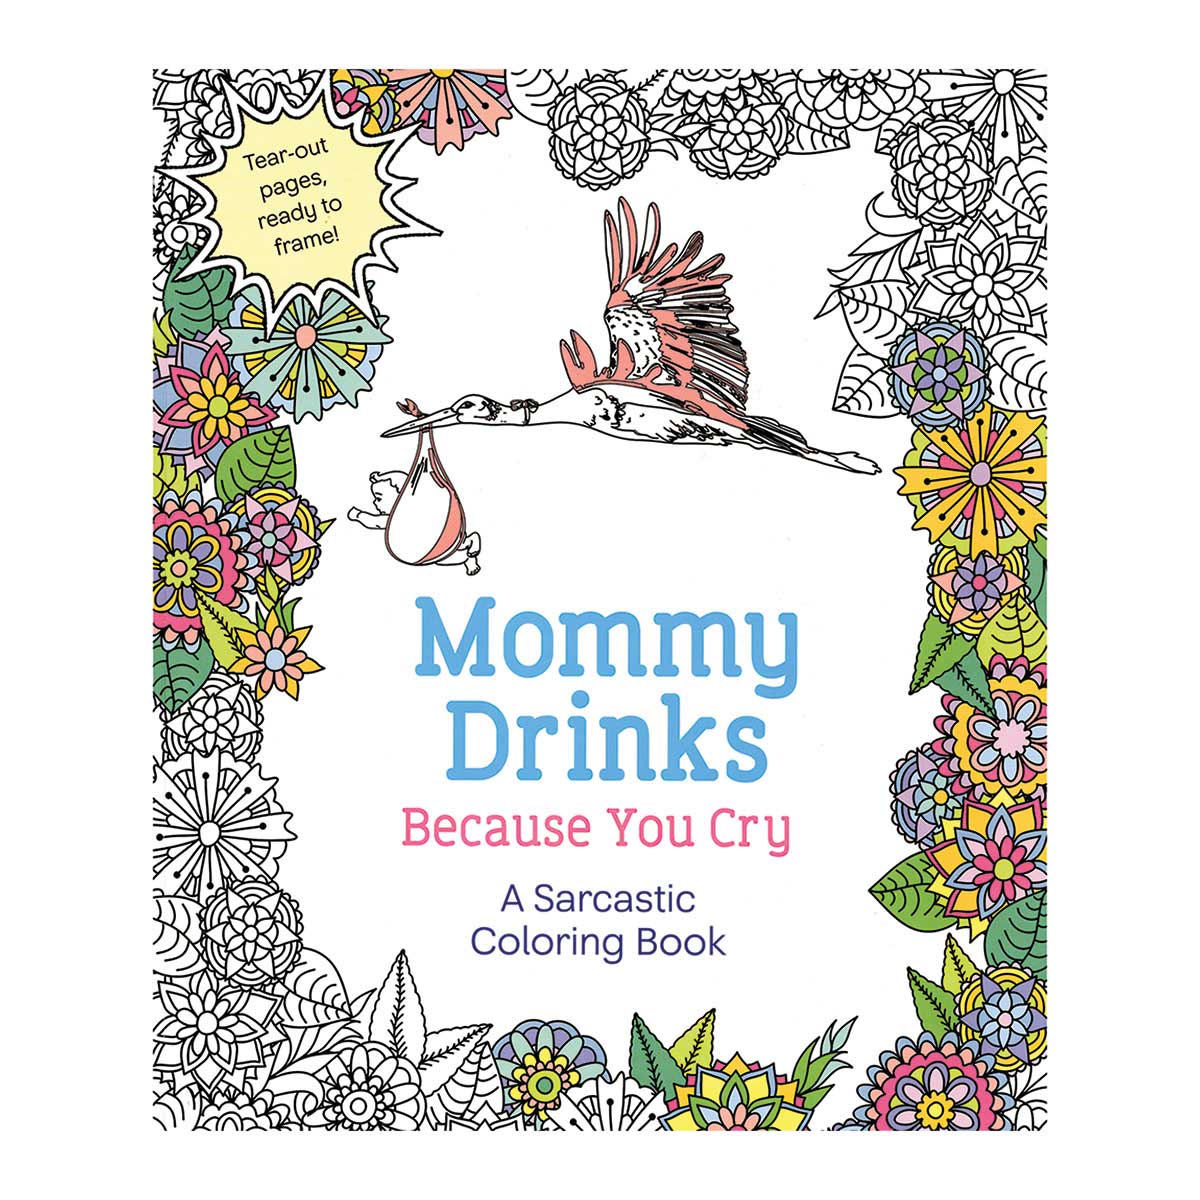 Mommy Drinks Because You Cry Coloring Book - St. Martin's Griffin